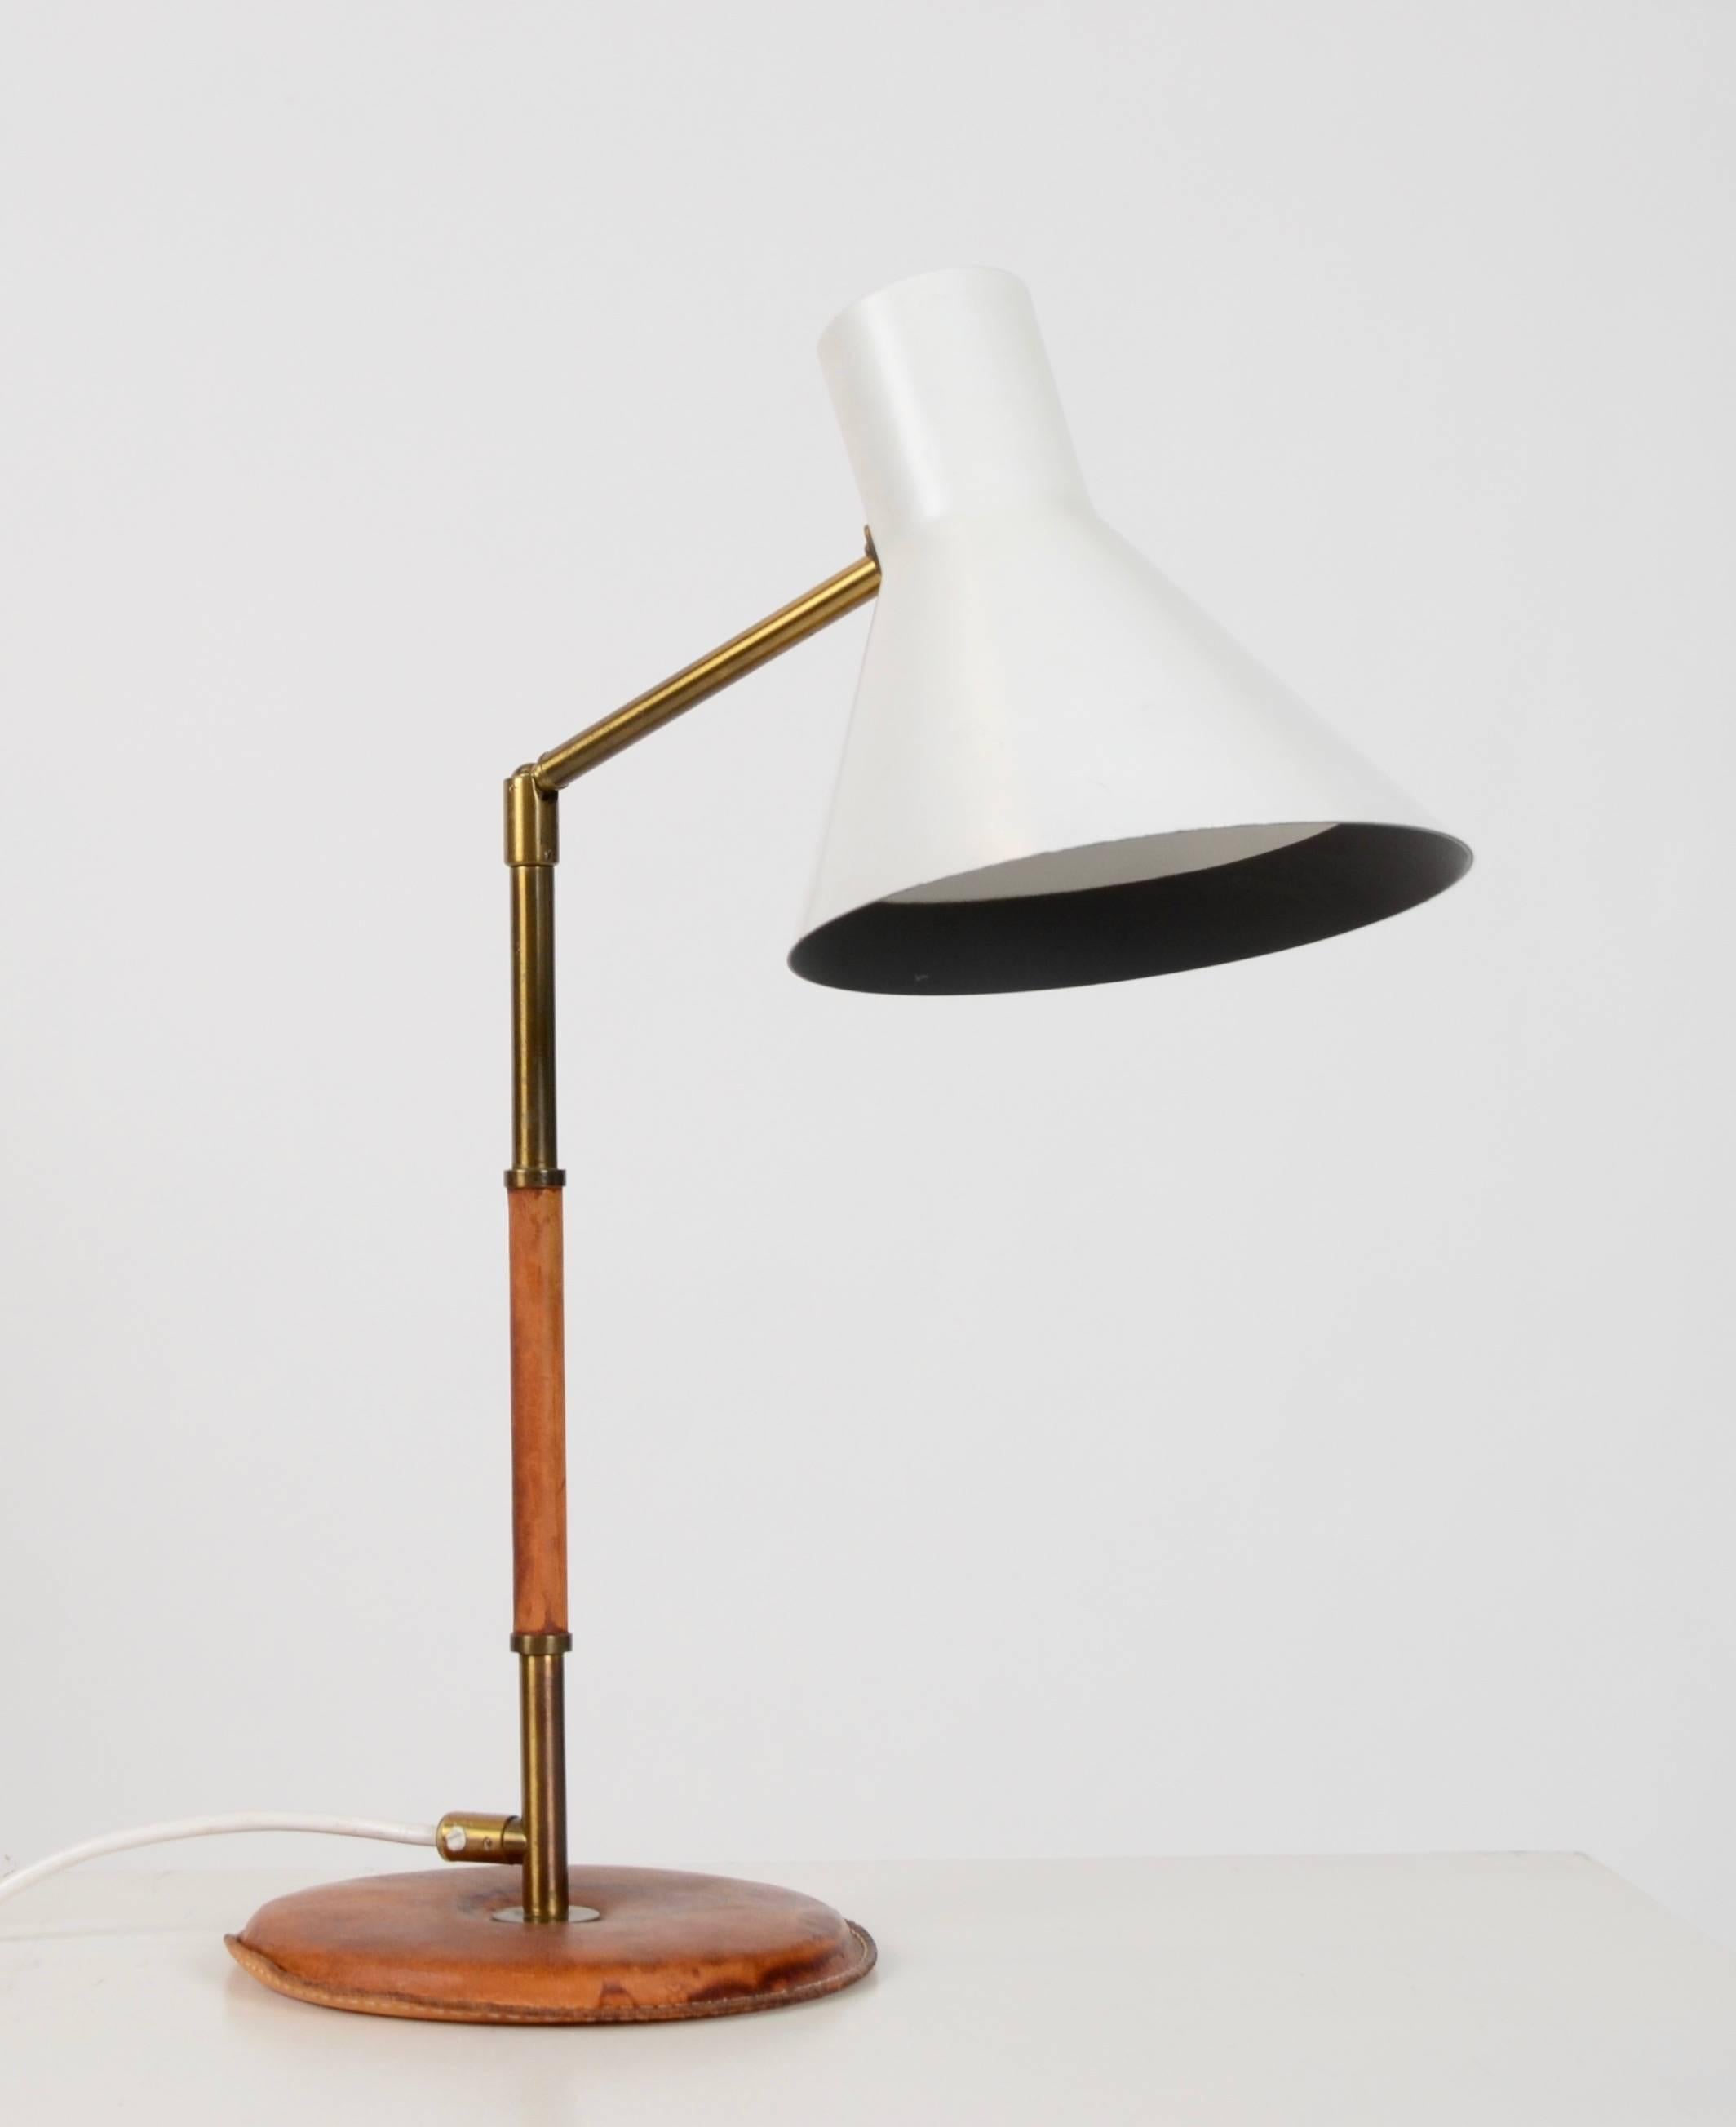 Table lamp with leather base and adjustable height by Ateljé Lyktan, Sweden, mid-1900s.